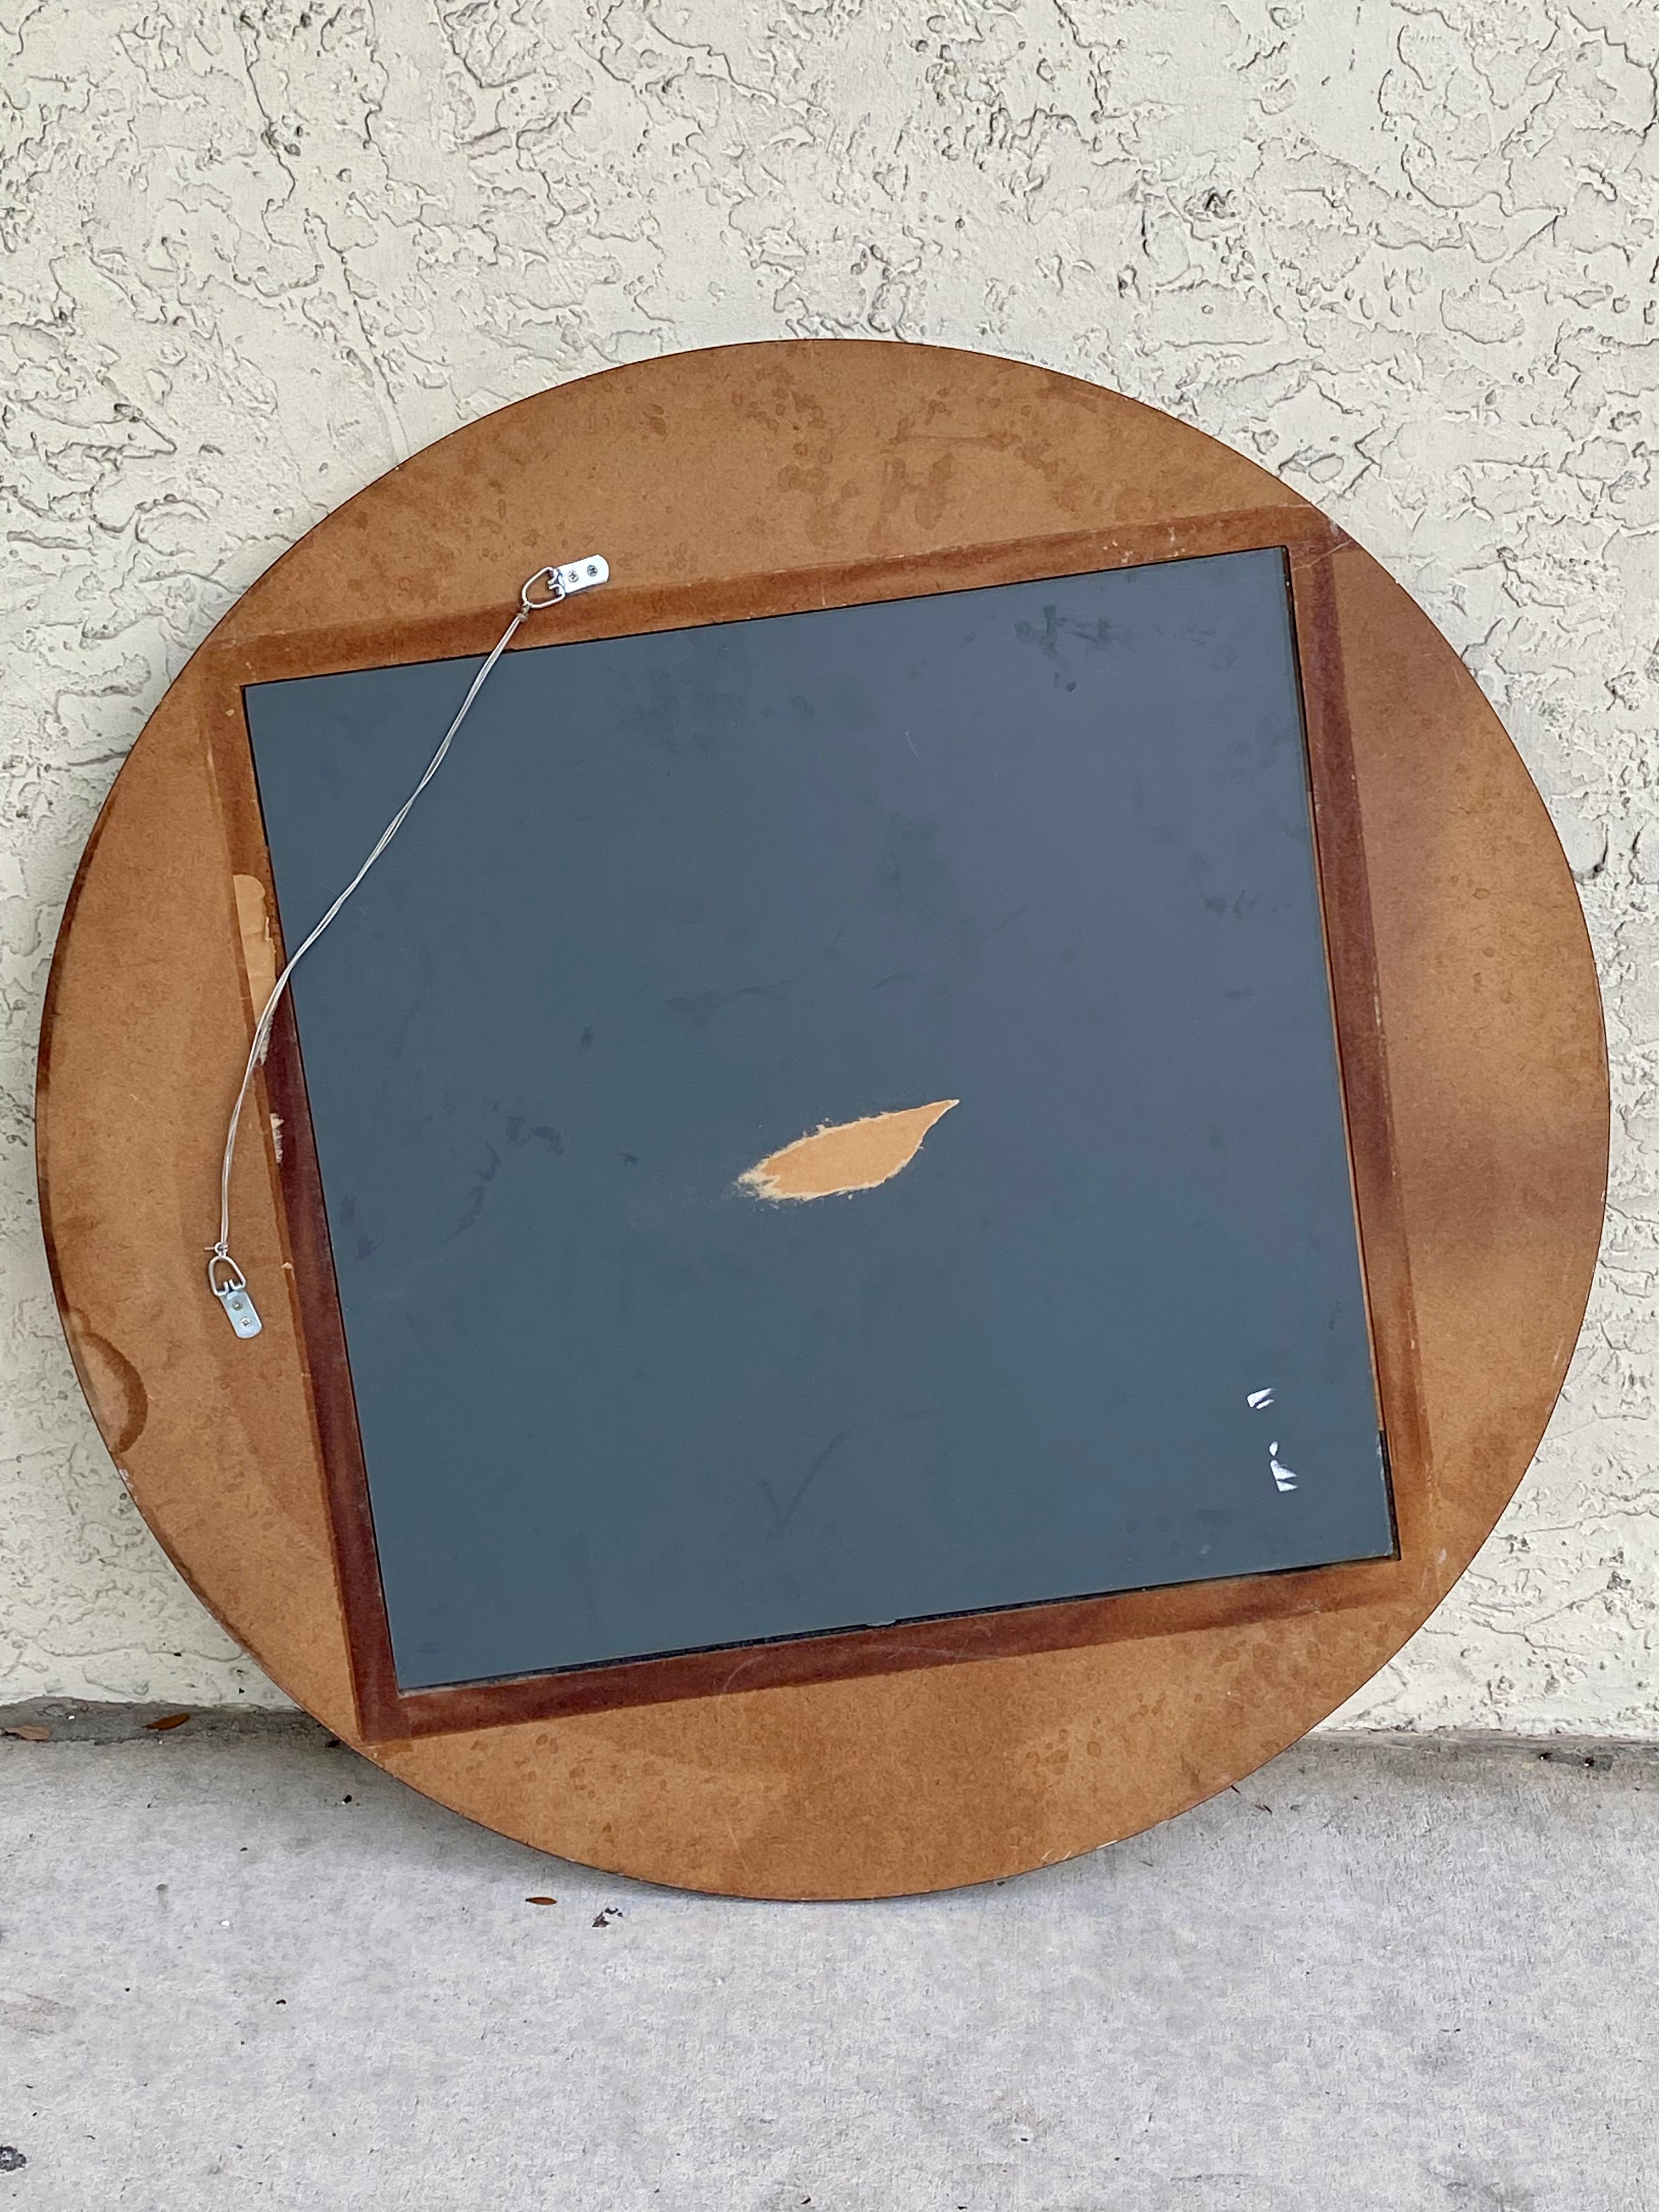 1990s Memphis Style Postmodern Abstract Art Console Desk and Mirror For Sale 8